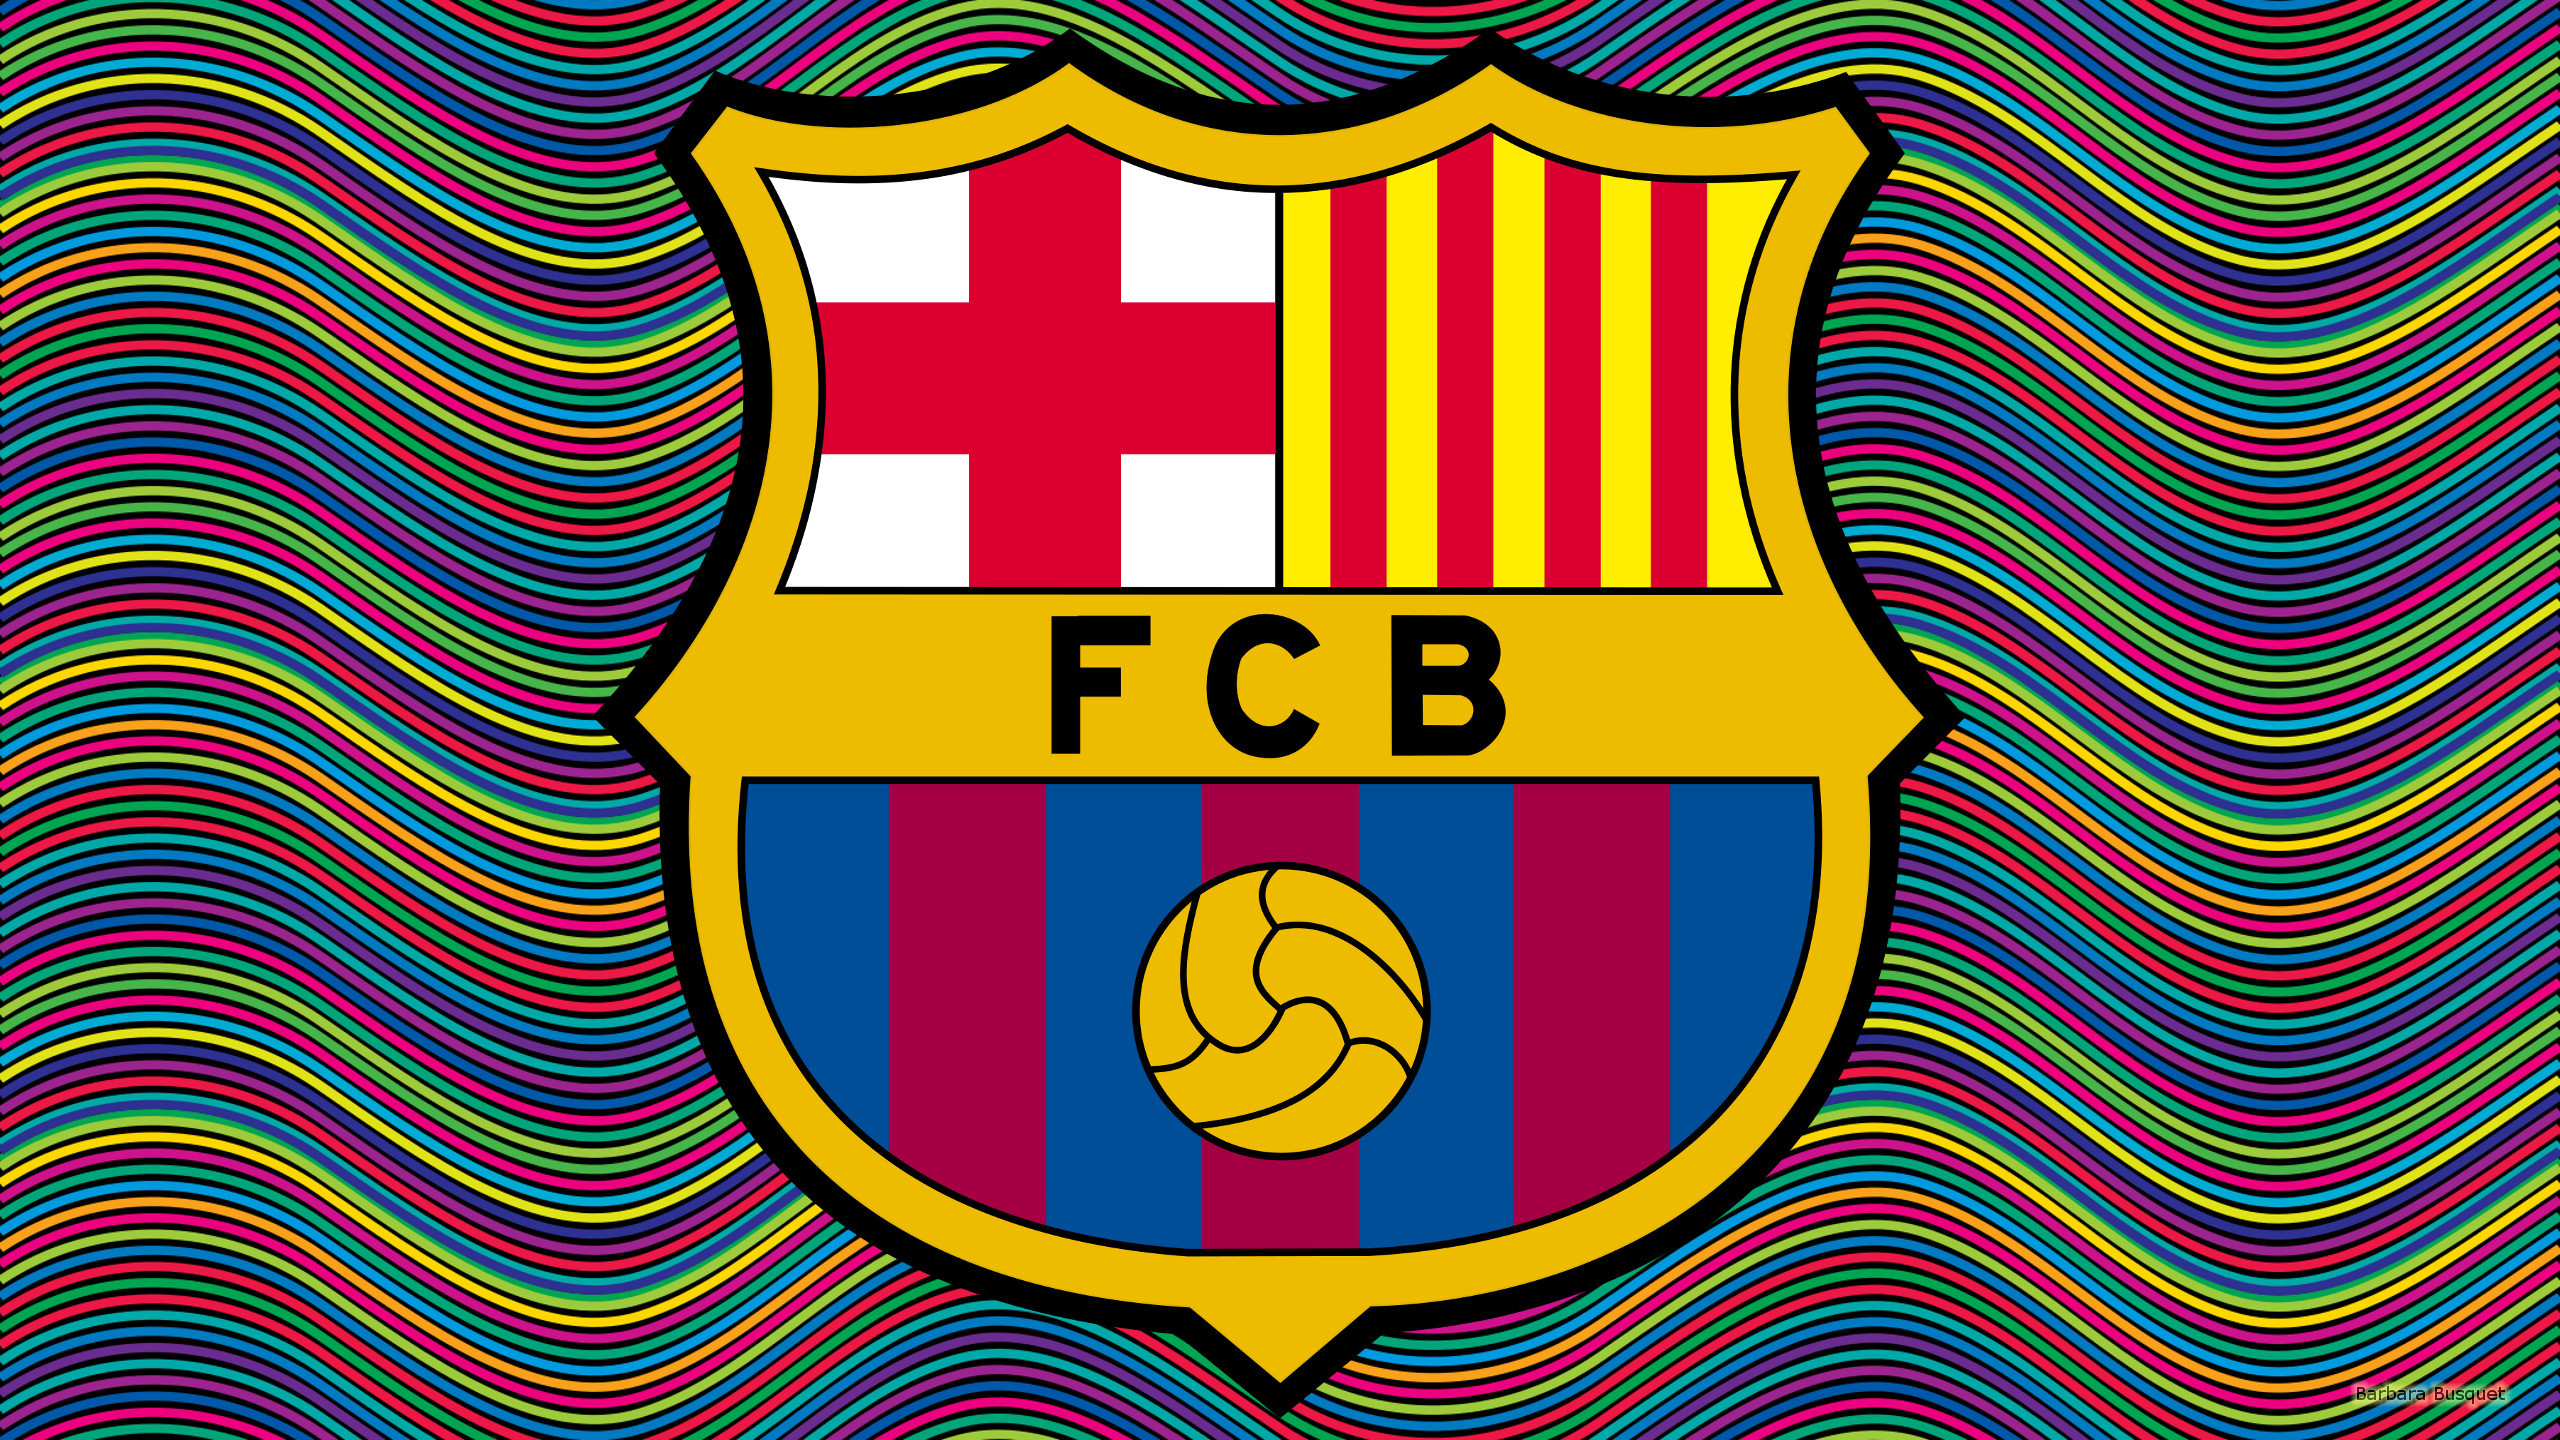 2560x1440 FC Barcelona wallpaper with colofull lines.